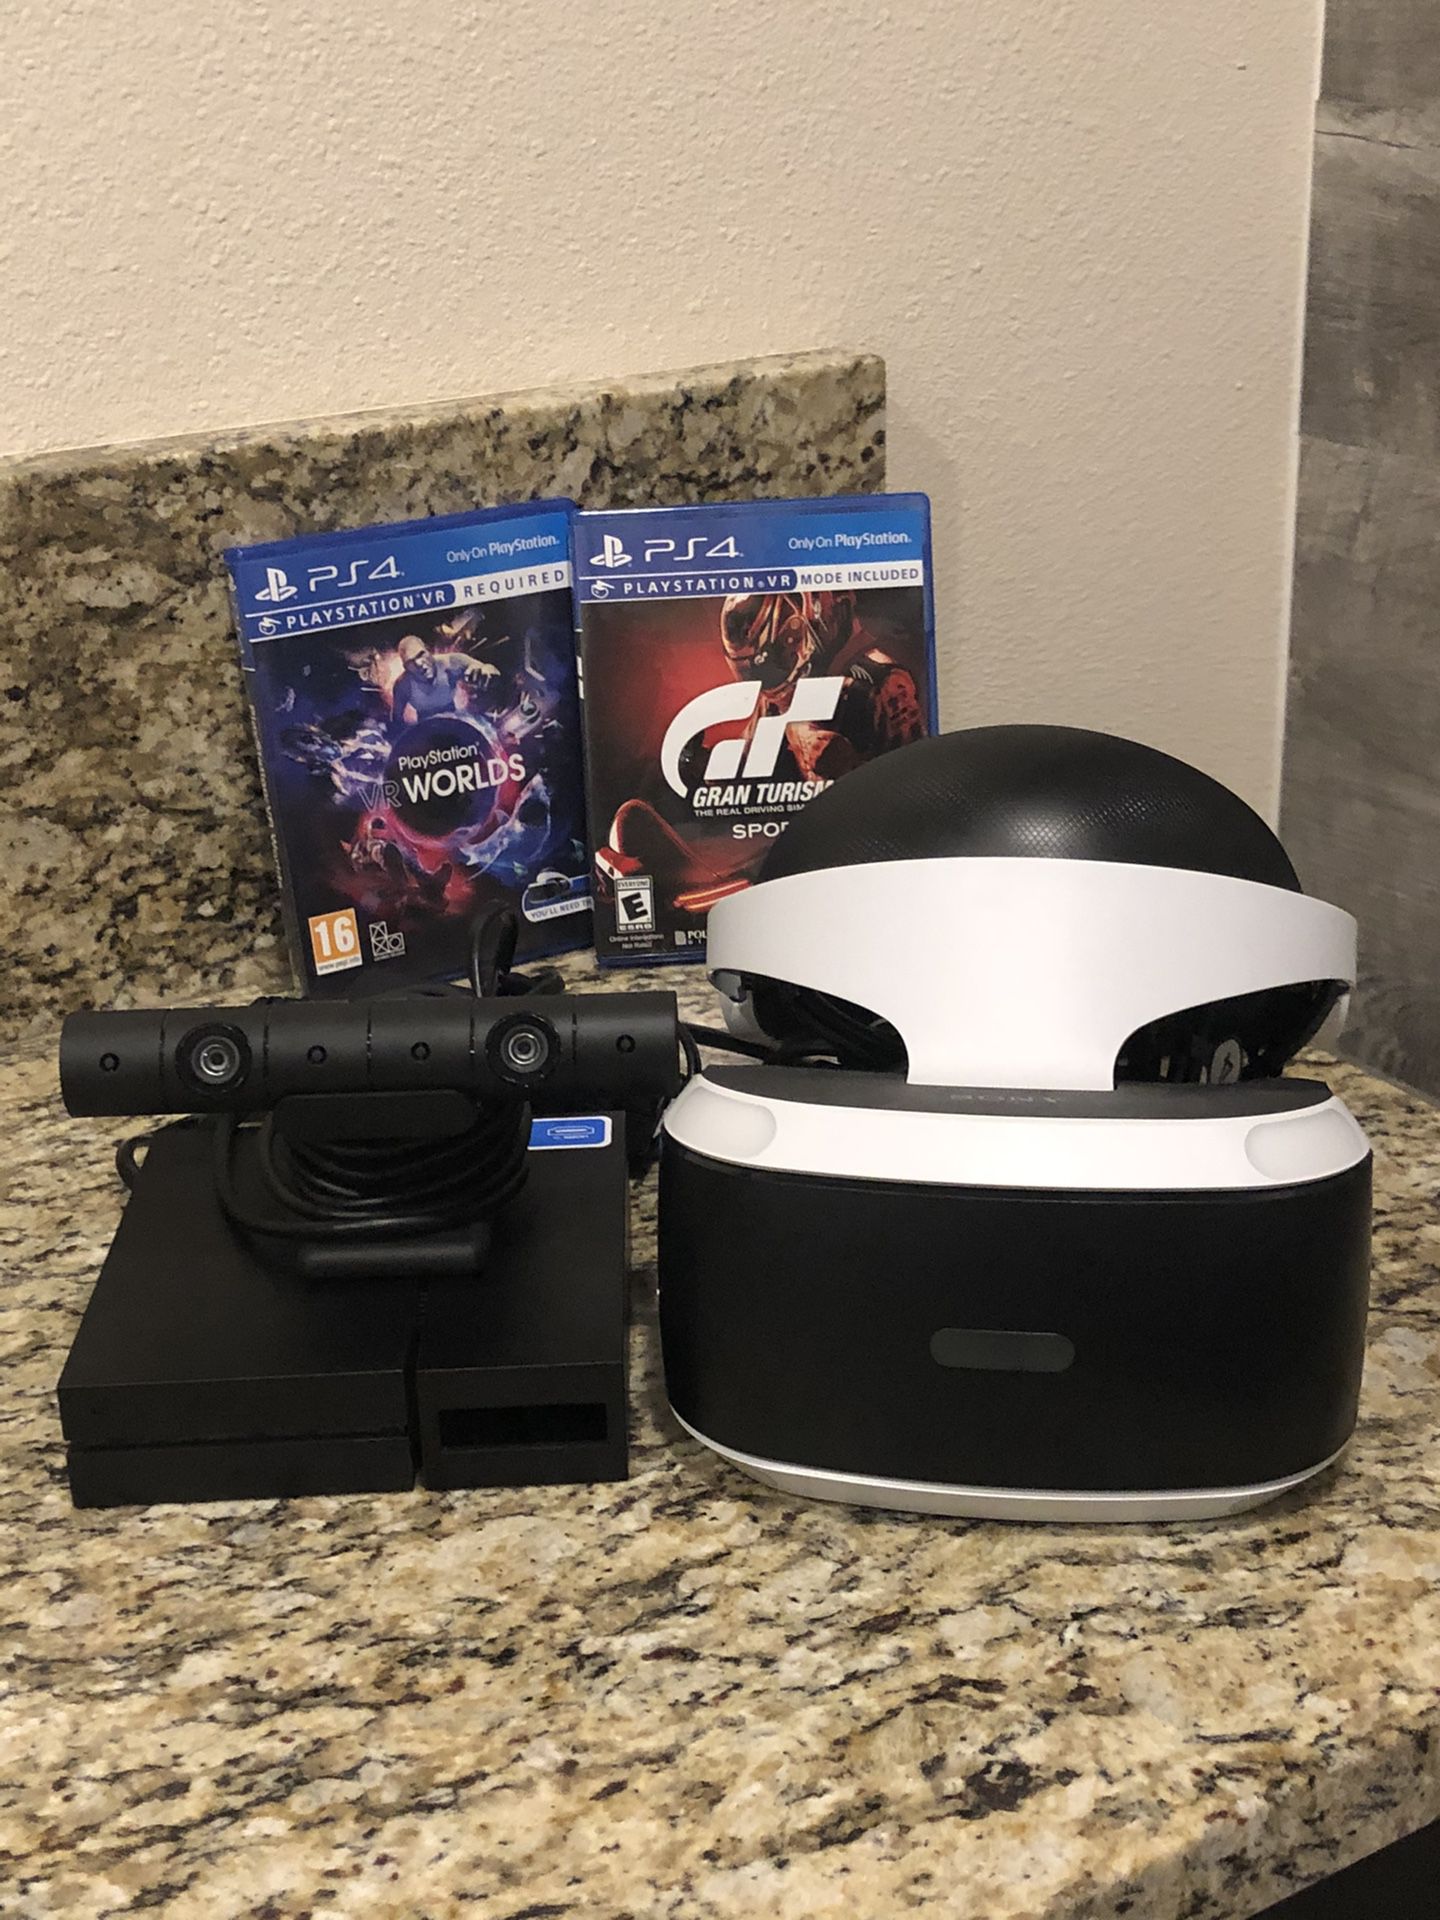 Psvr with games and ps4 facecam**black Friday deal**